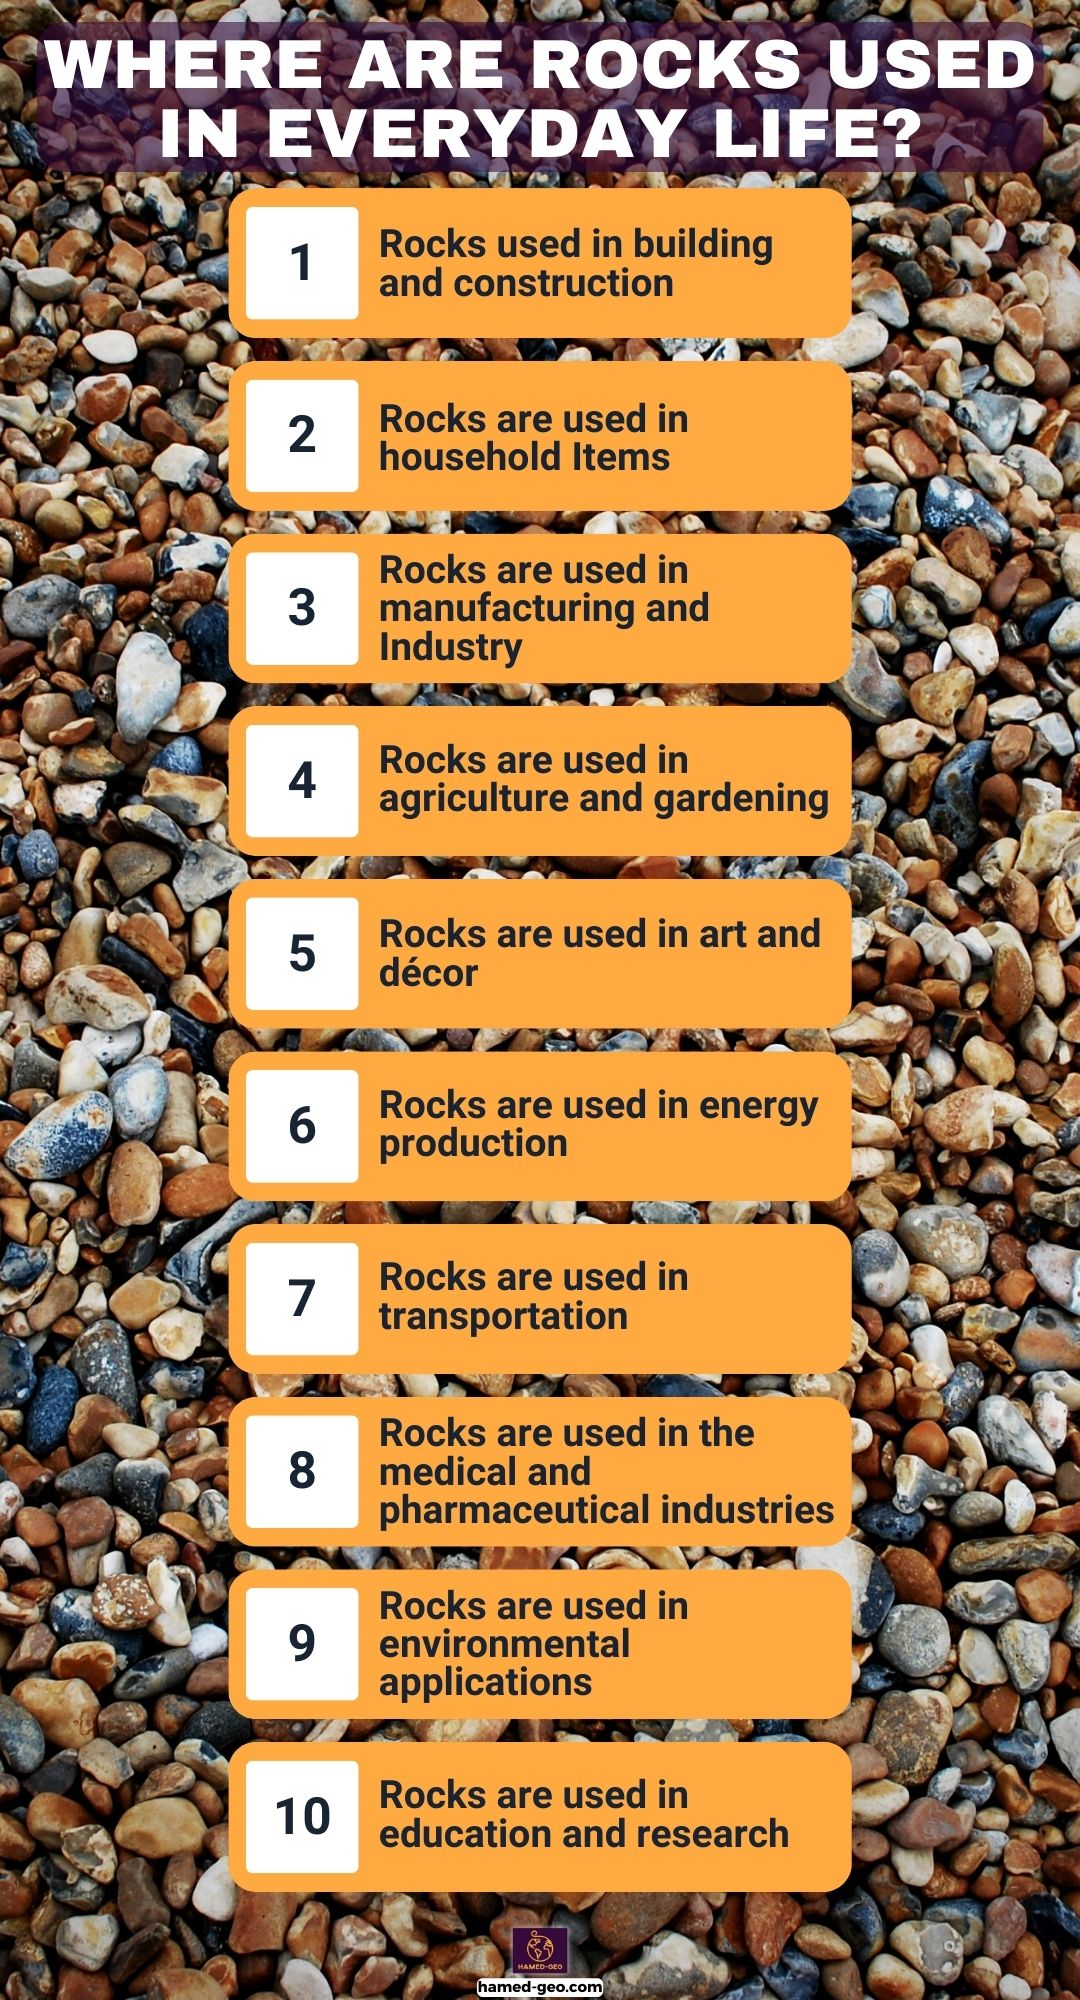 Where are rocks used in everyday life 